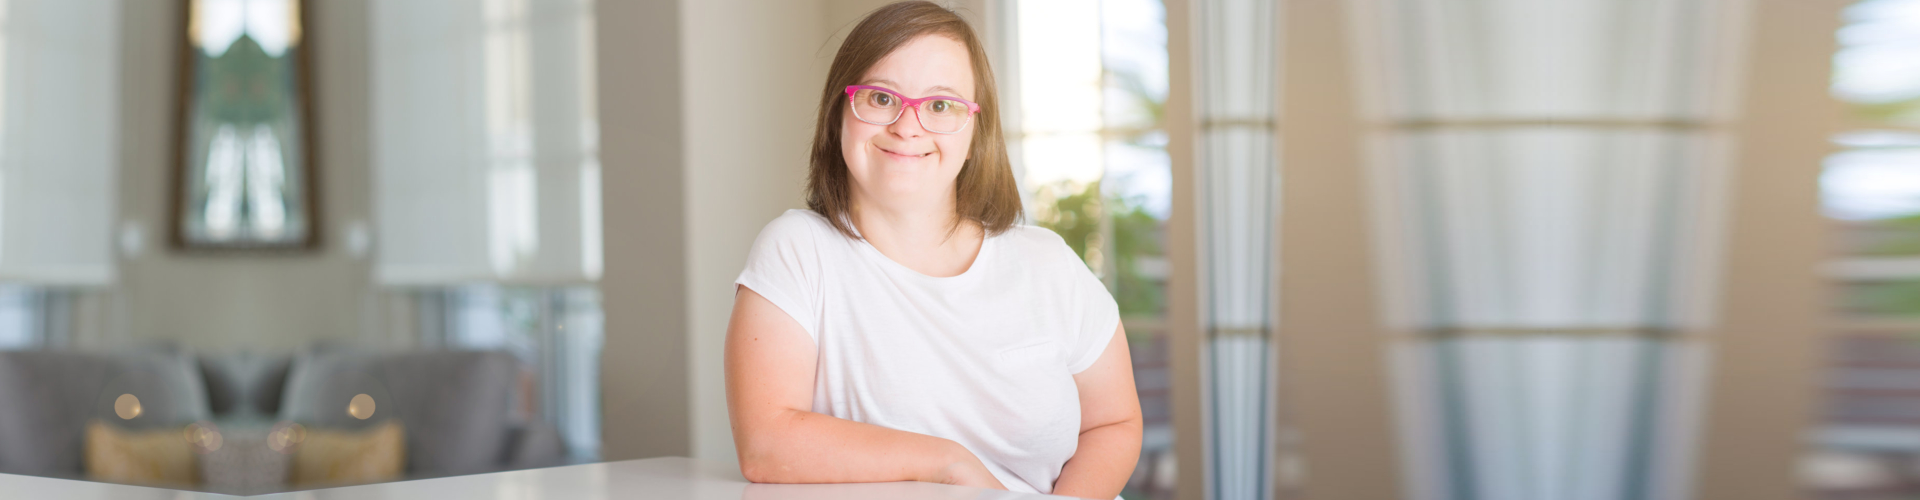 Down syndrome woman at home smiling